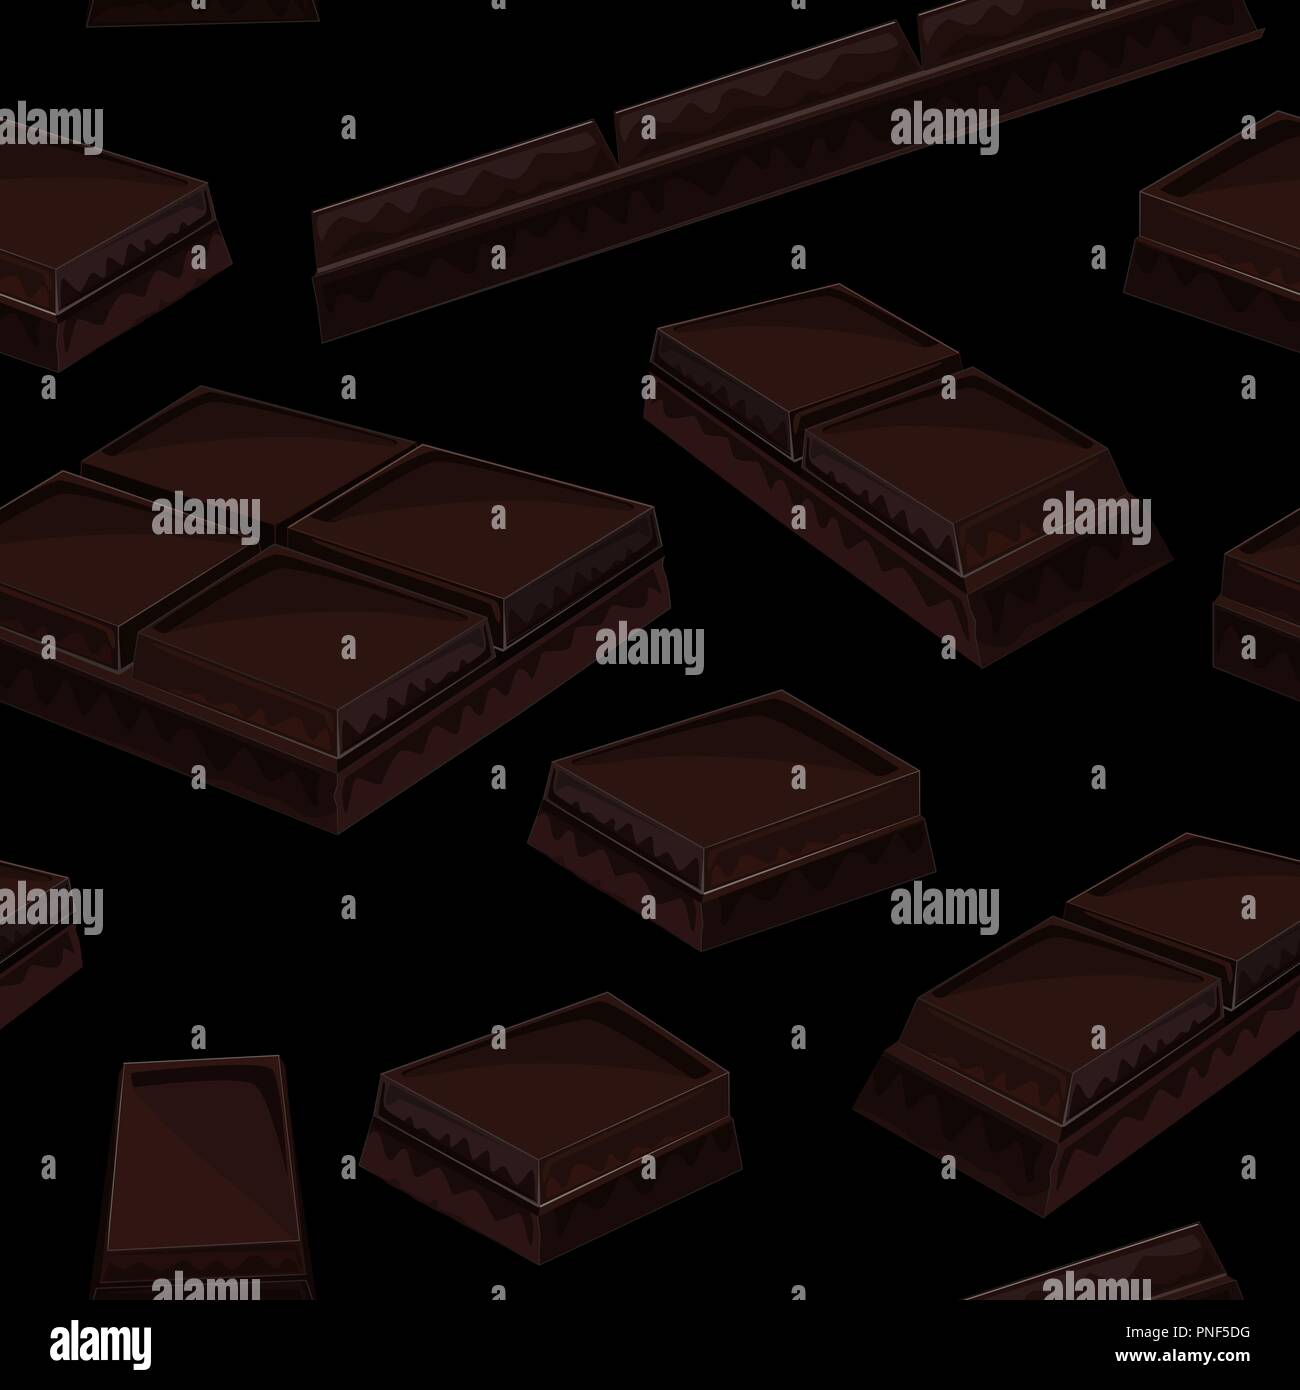 Luxury seamless pattern with pieces of black chocolate bars on dark background. Vector illustration Stock Vector